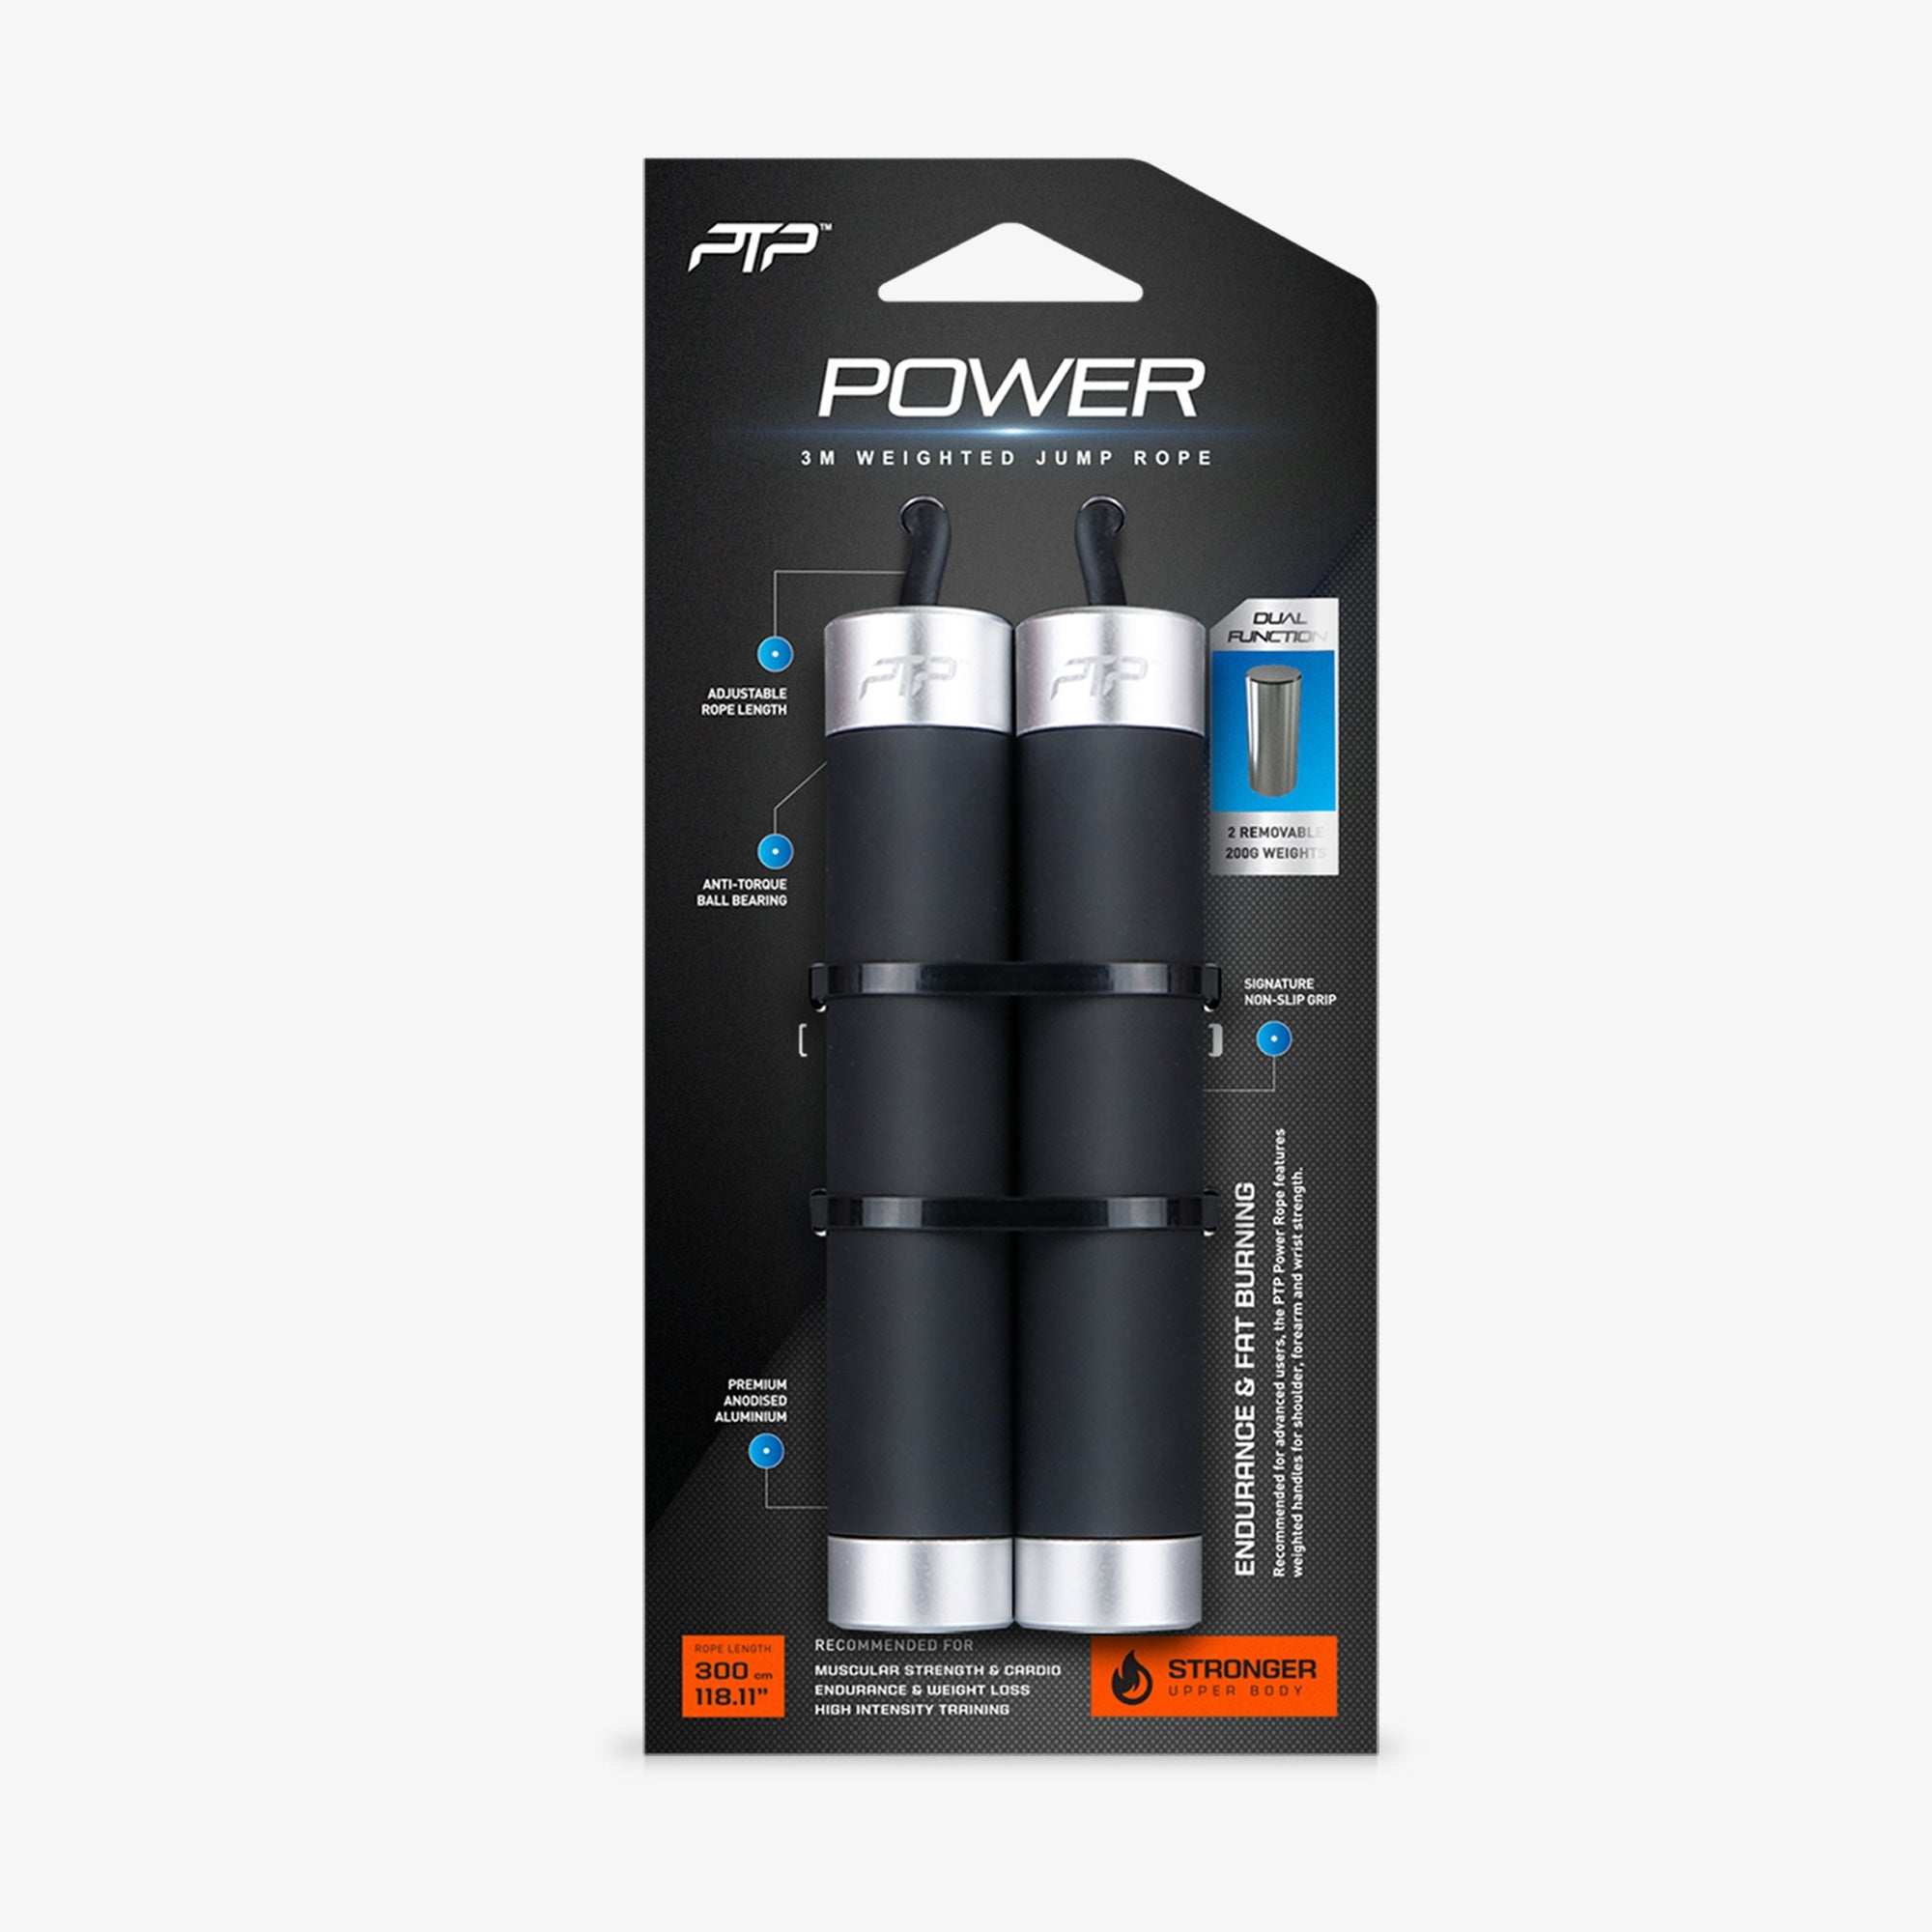 PTP Power Rope | Weighted Skipping Rope for Experienced Jumpers